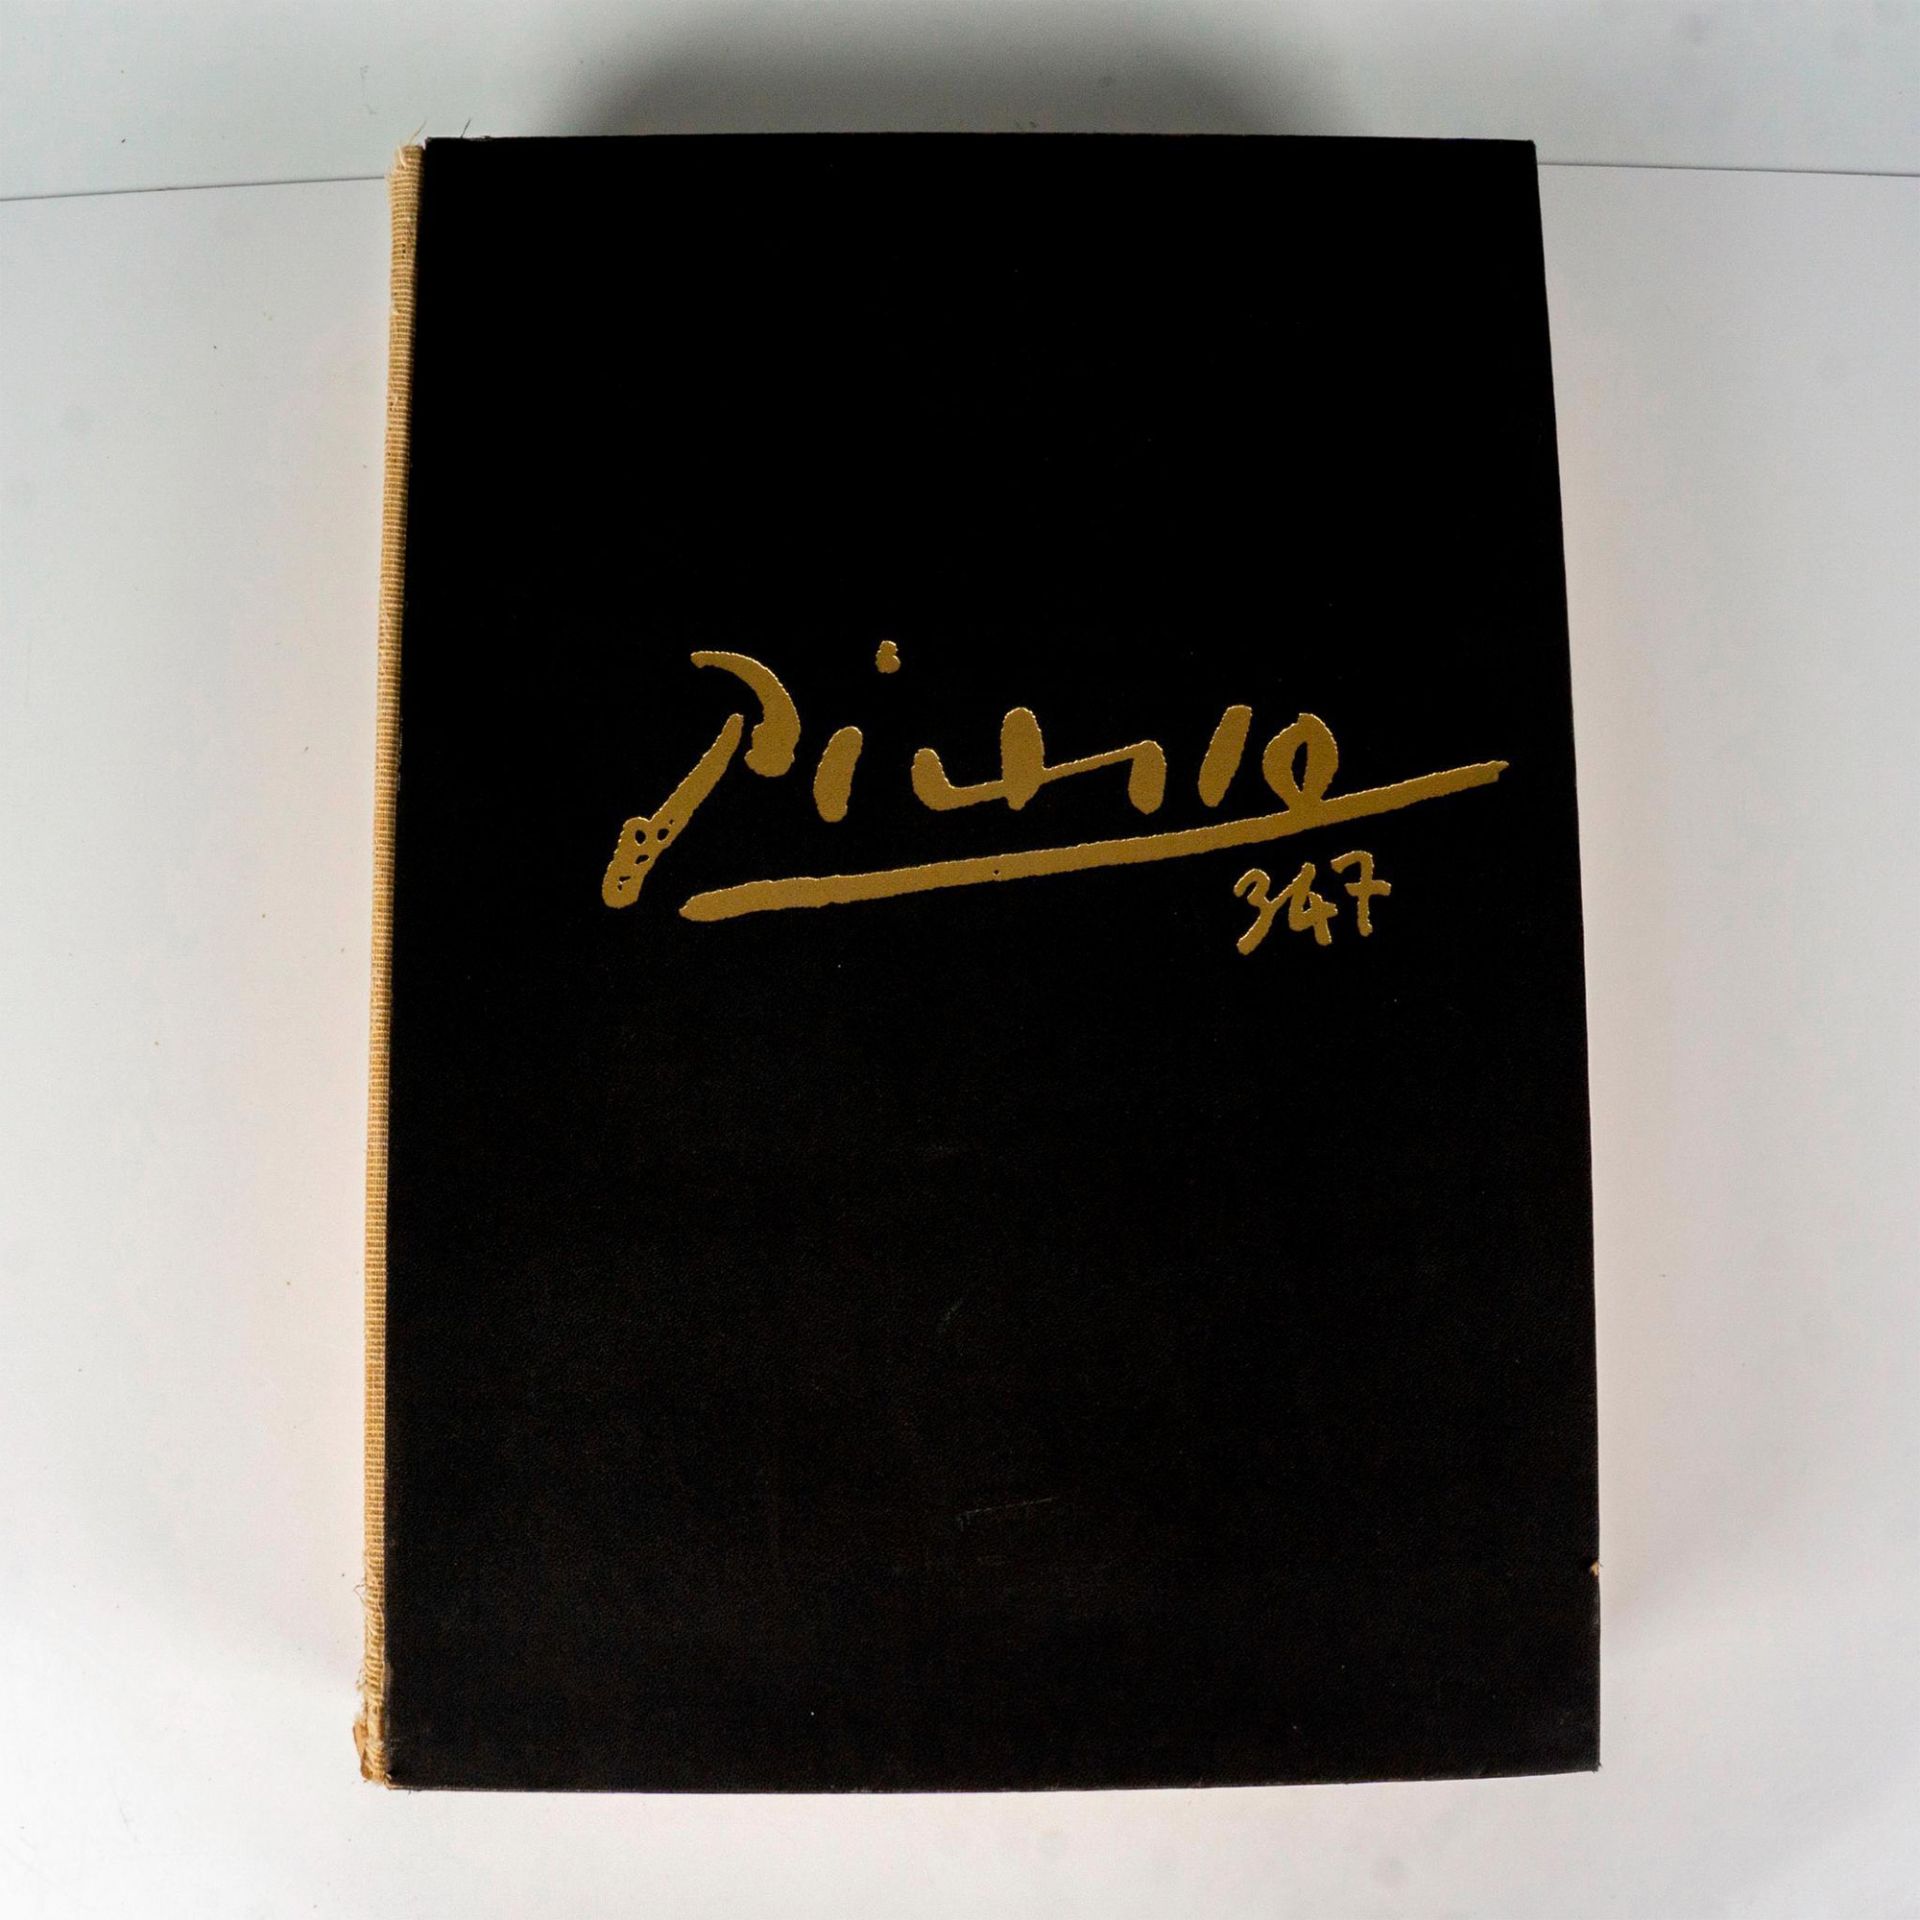 Pablo Picasso 347 First Edition Two Volumes with Slipcase